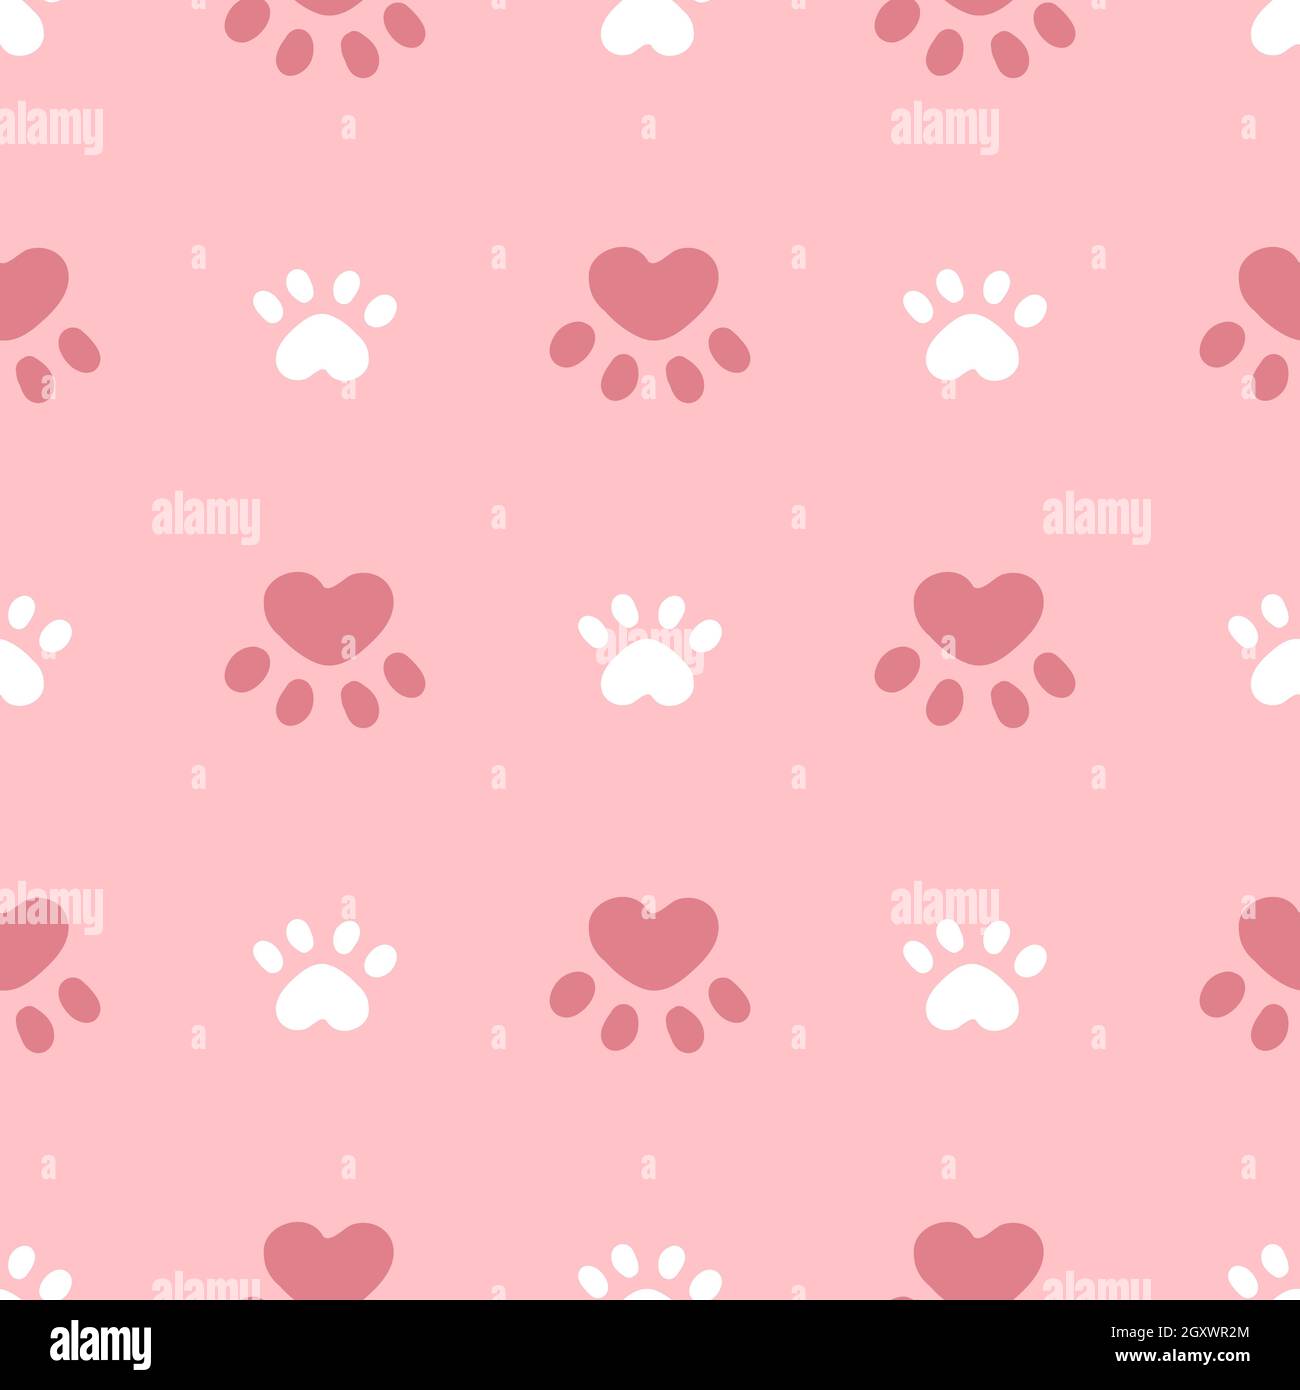 Pink and white cat or dog seamless pattern. Meow and cat paws background vector illustration. Cute cartoon pastel character for nursery girl baby print. Stock Vector